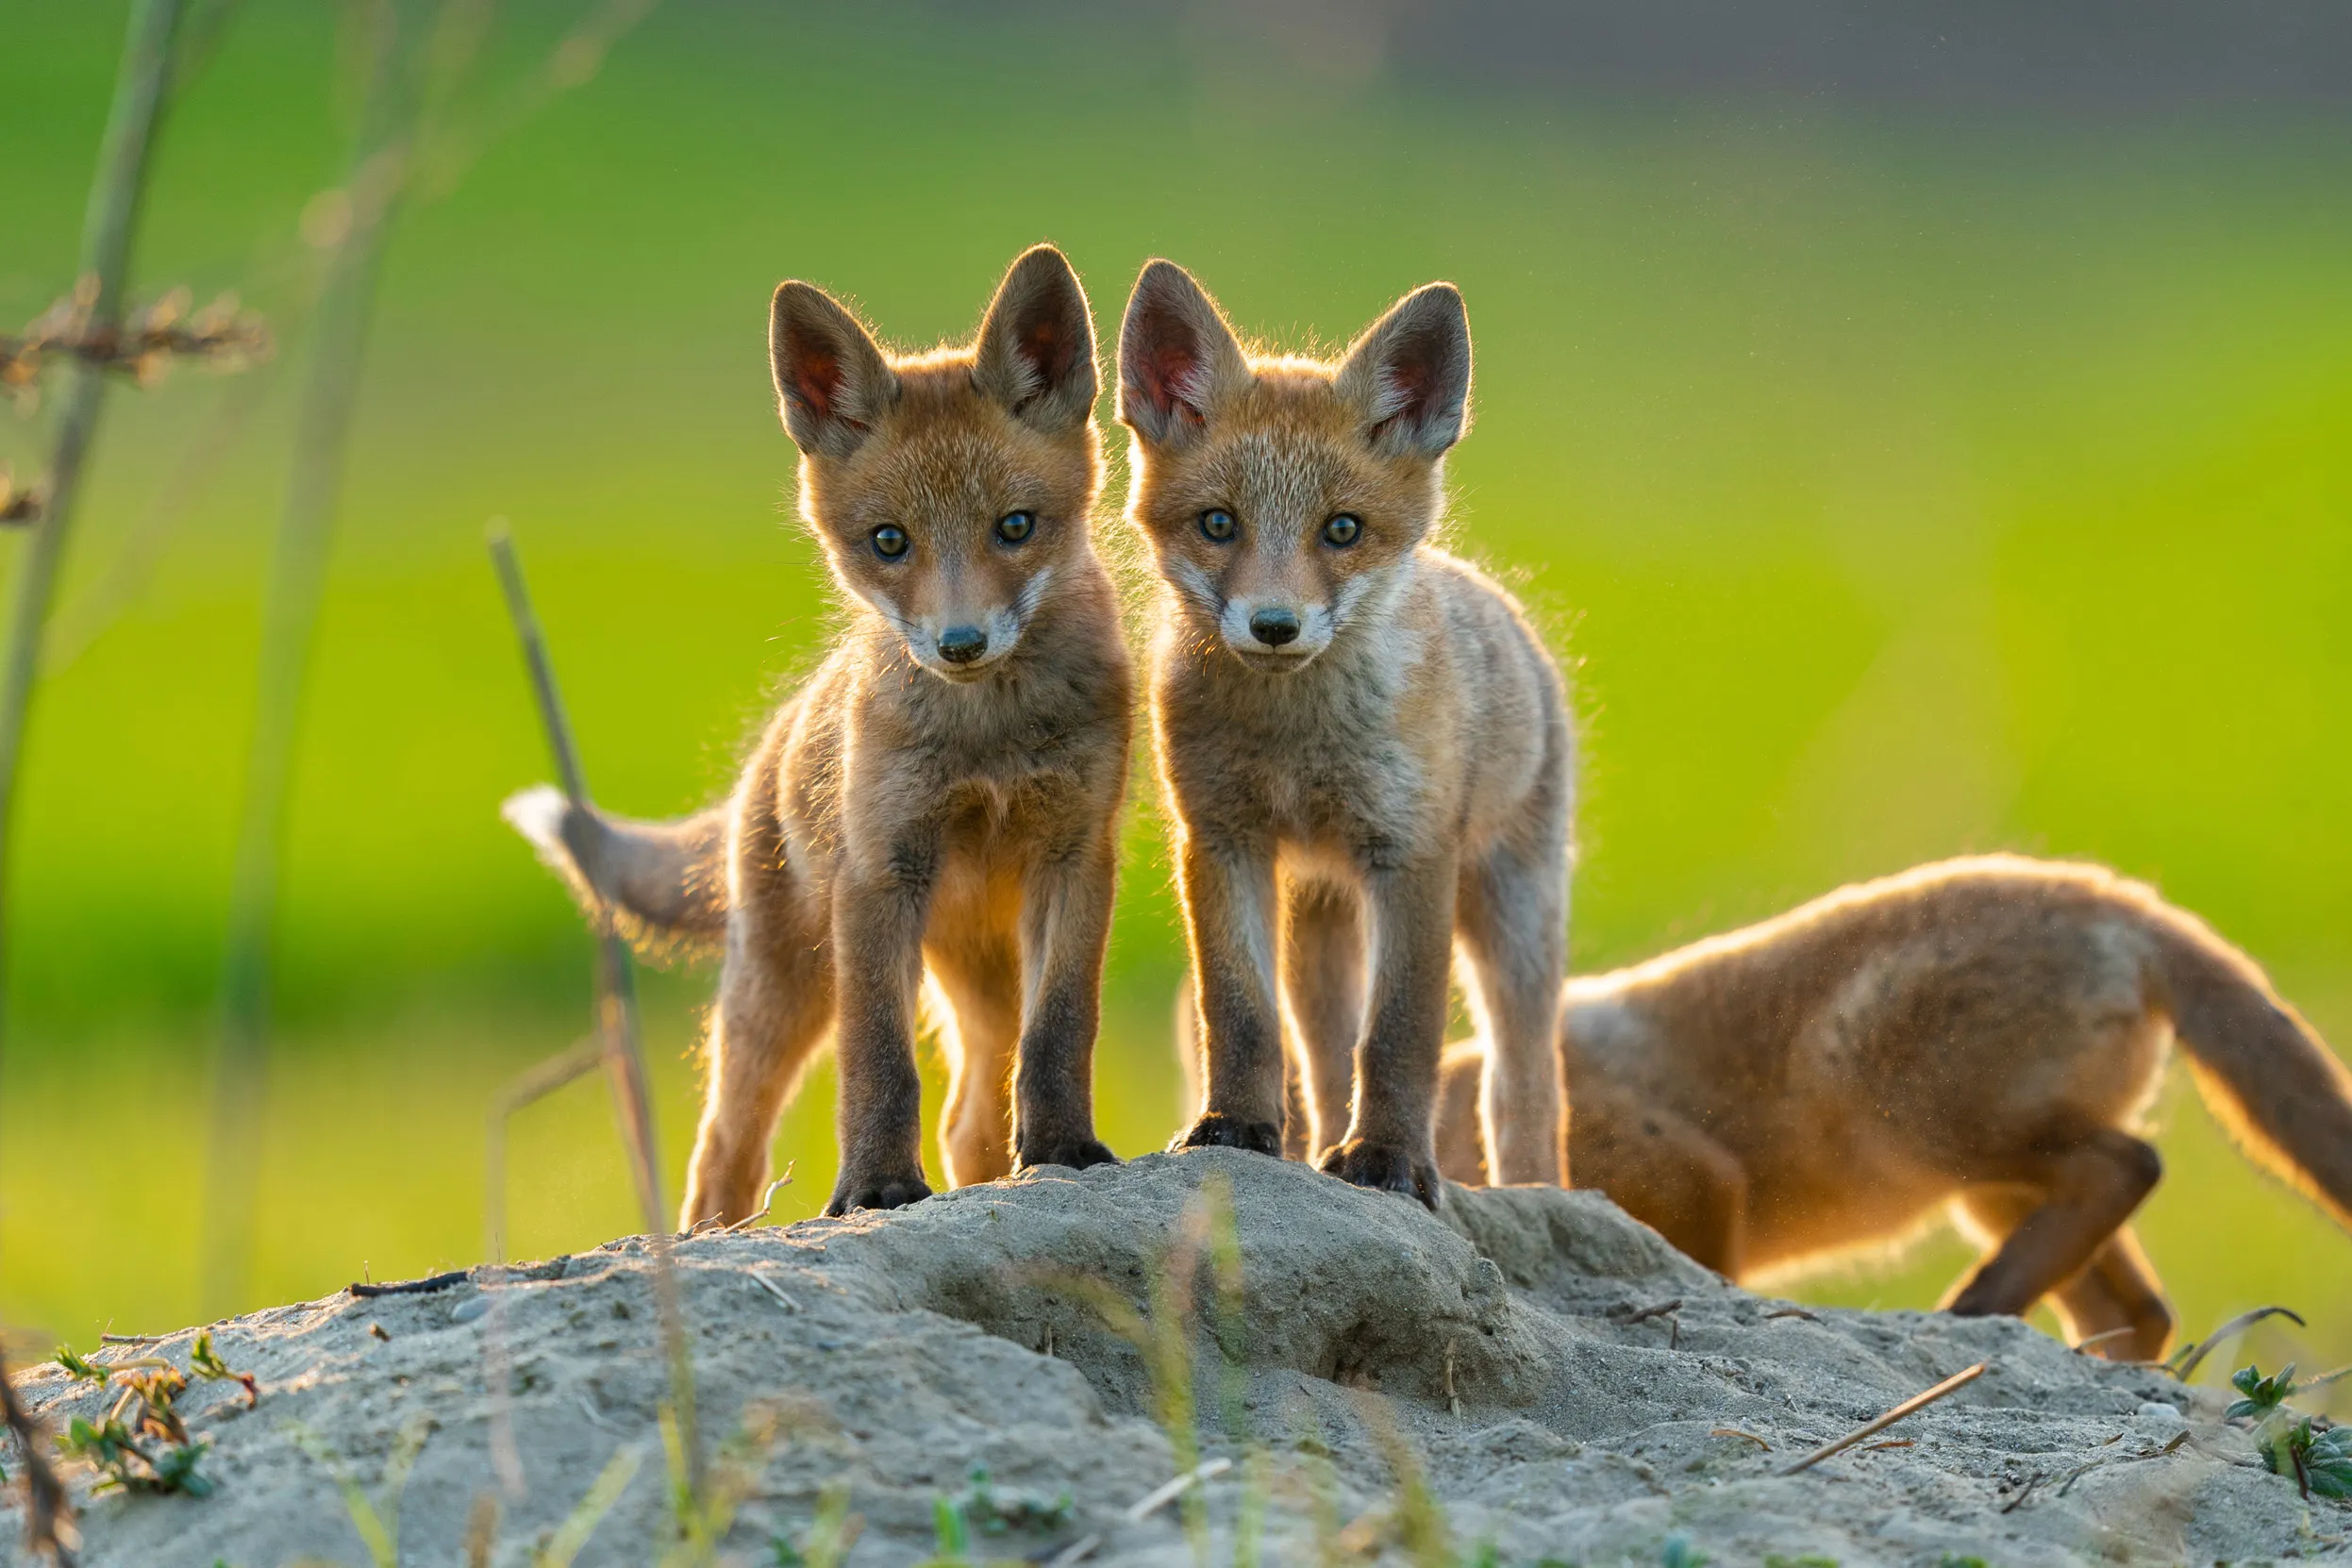 Three Red Fox cubs stood on a rock with a green grass background.